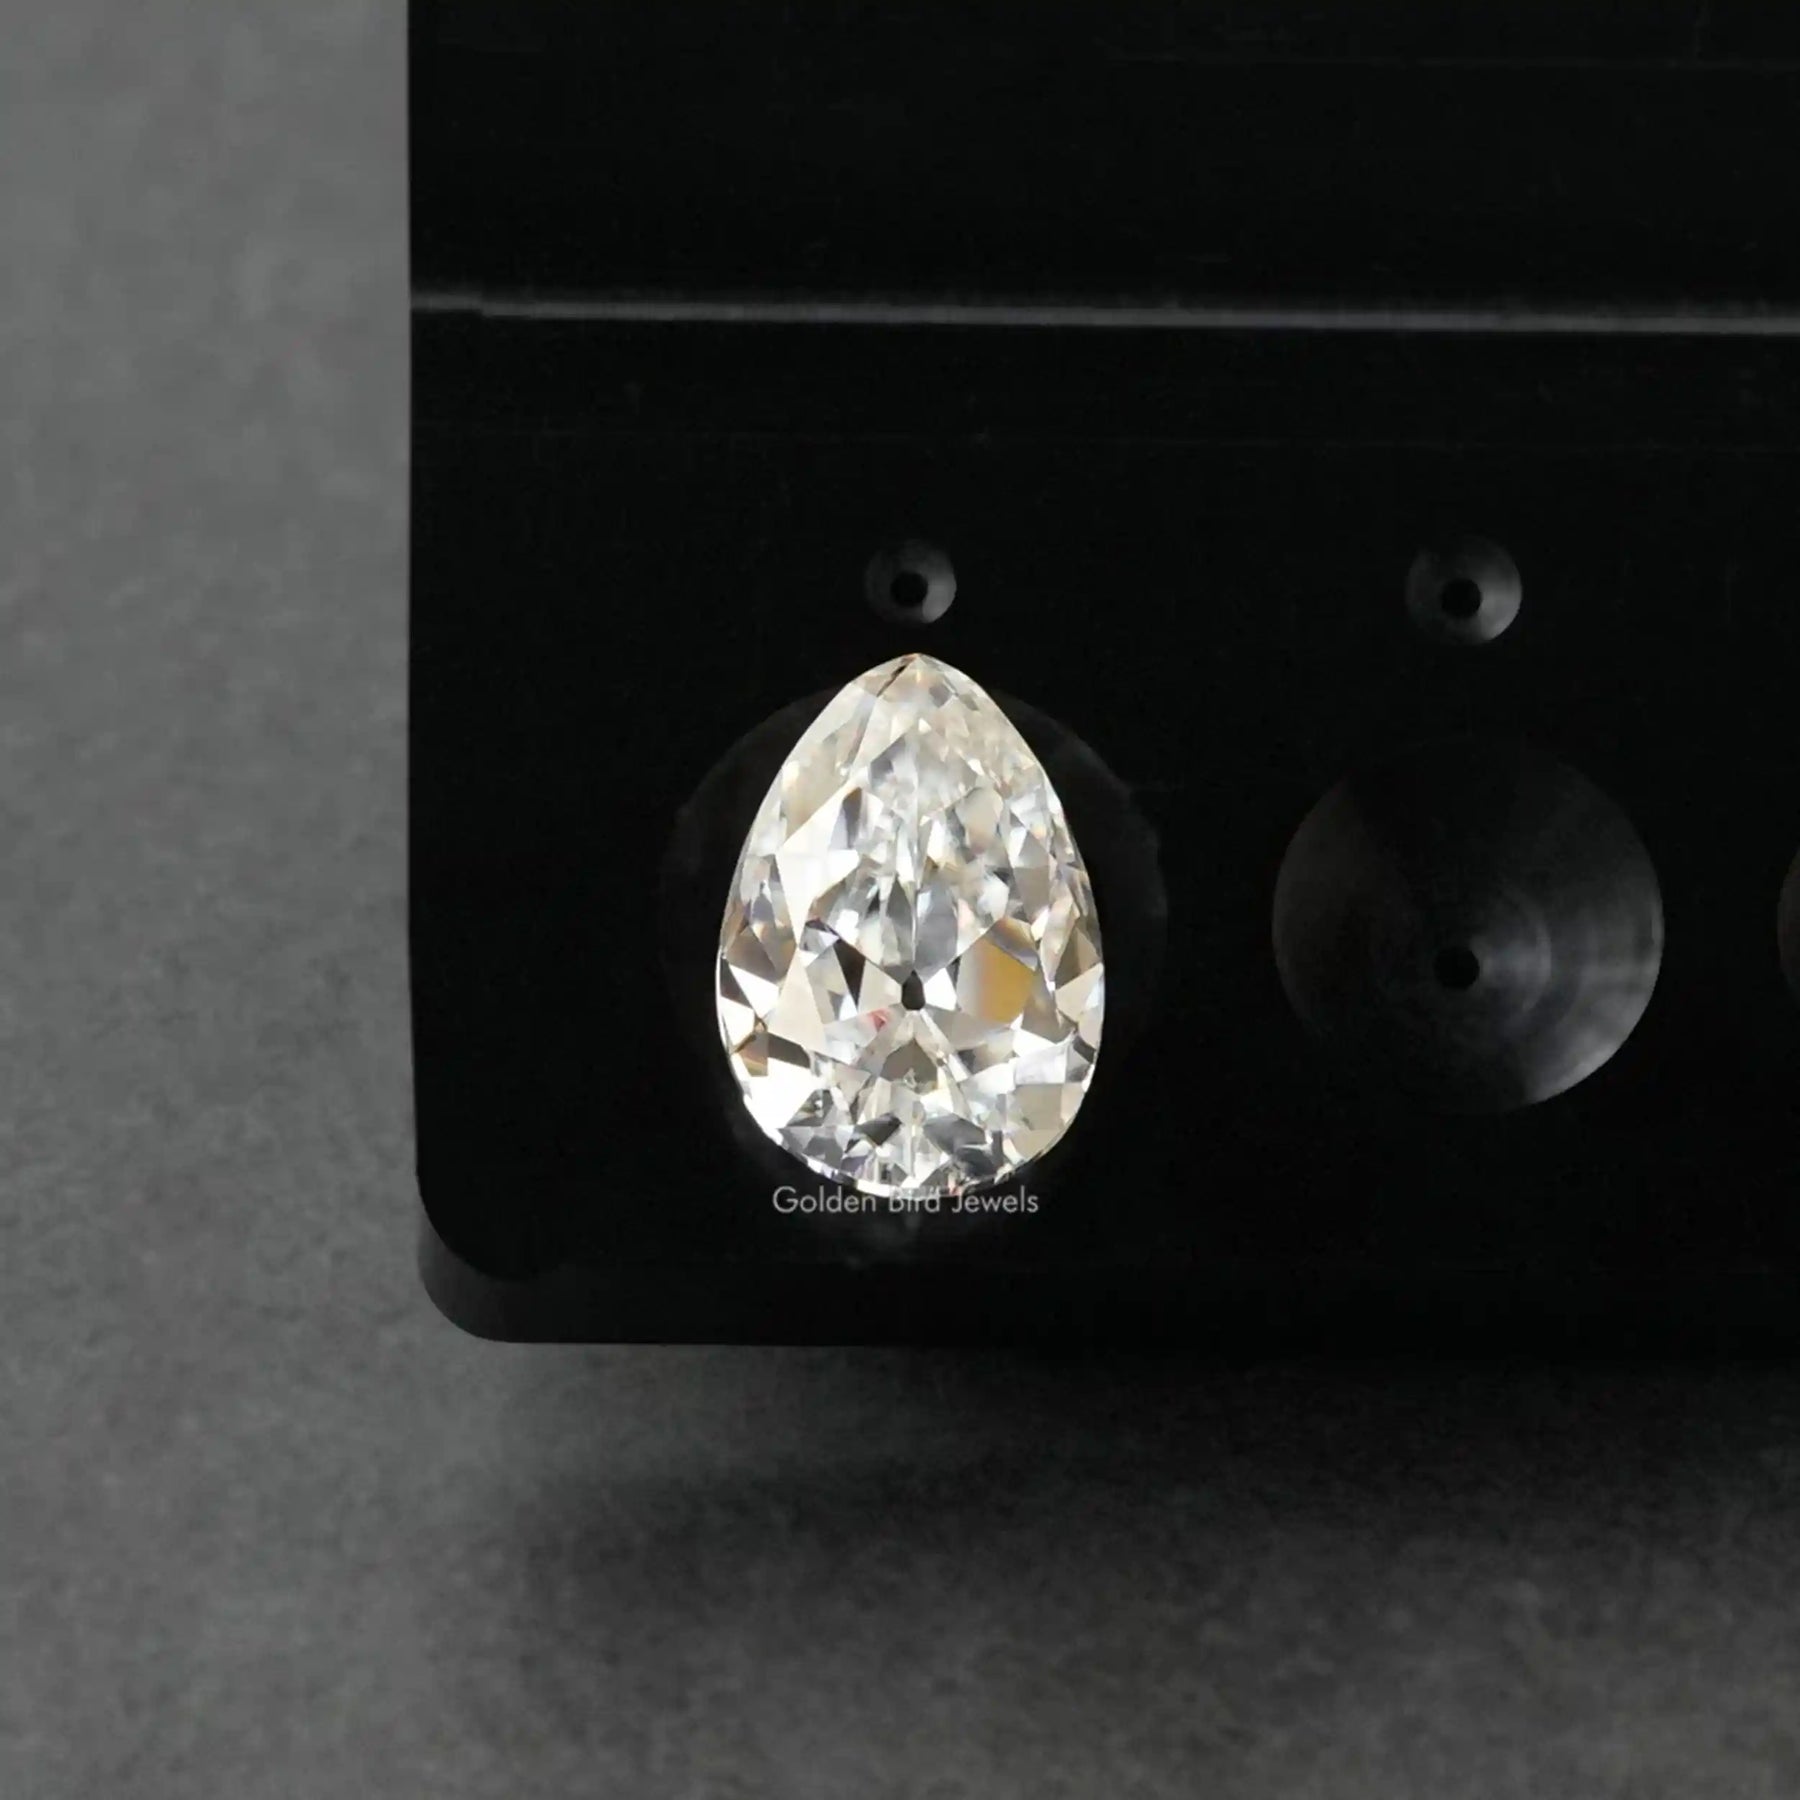 [Pear cut moissanite loose stone made of VVS clarity]-[Golden Bird Jewels]